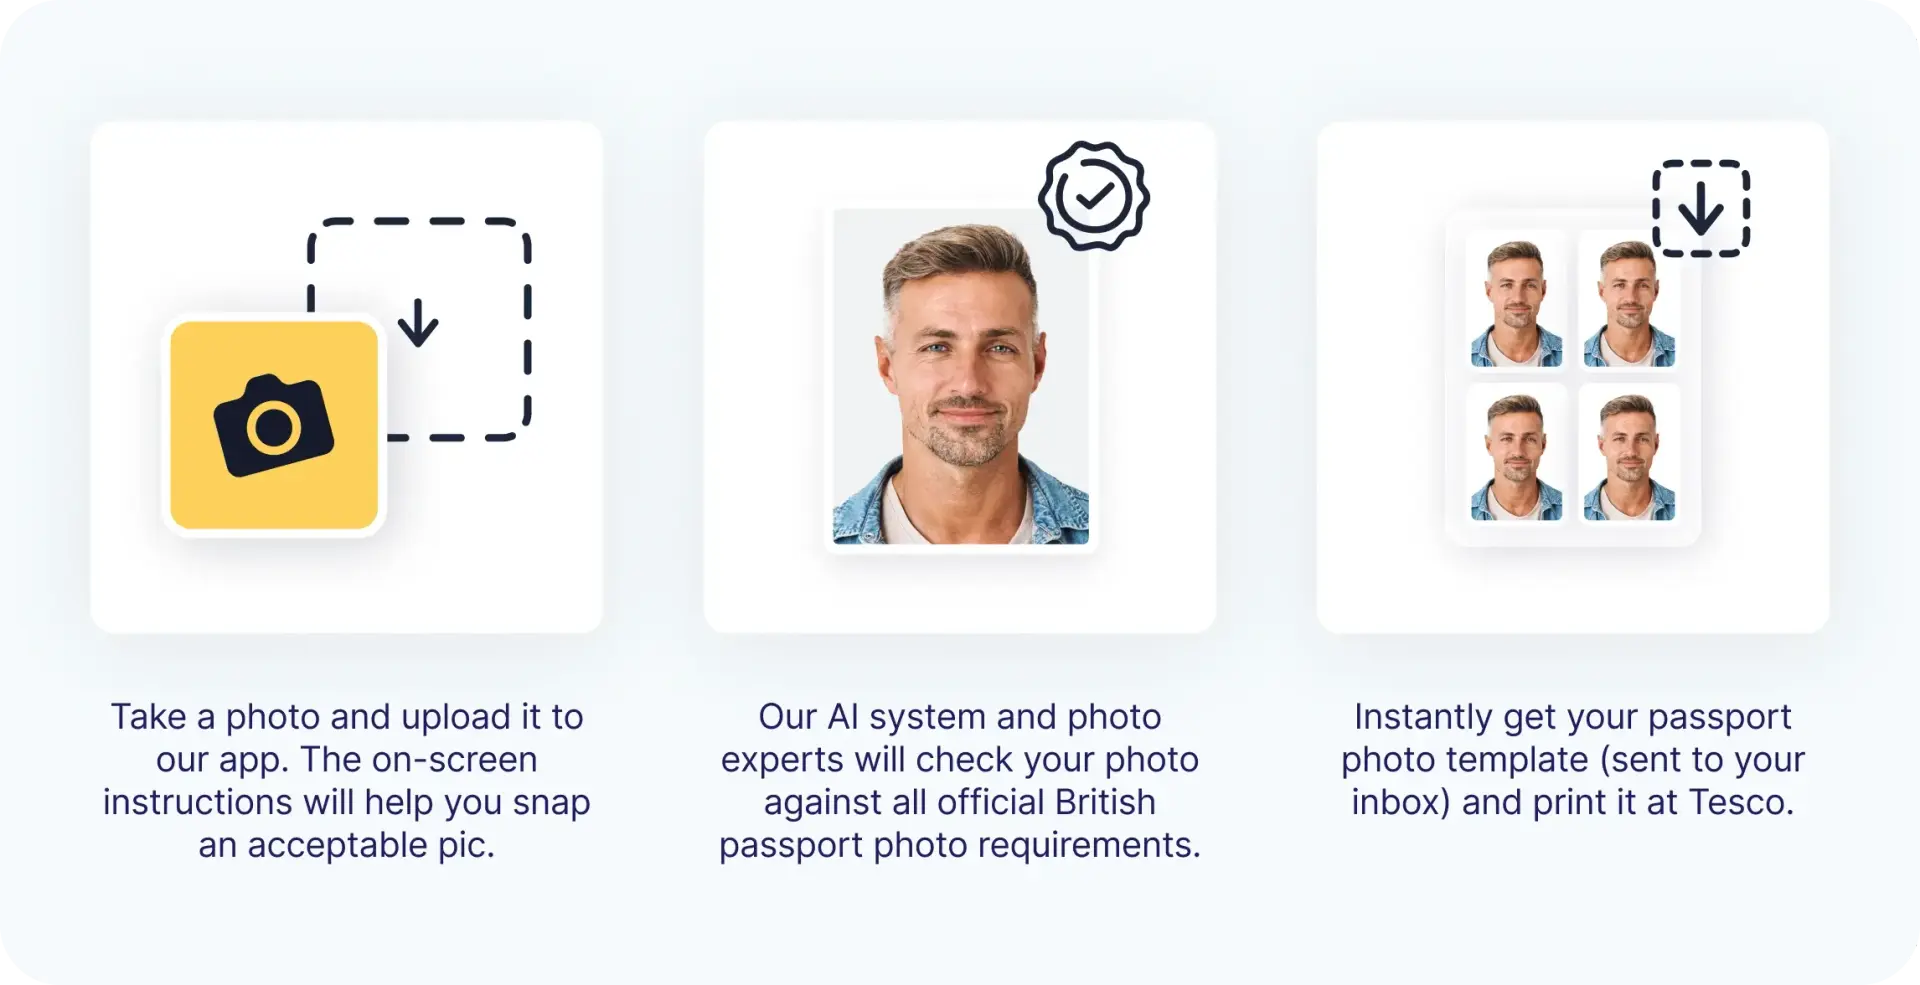 The process of getting a passport photo template with our mobile photo booth described in three steps.